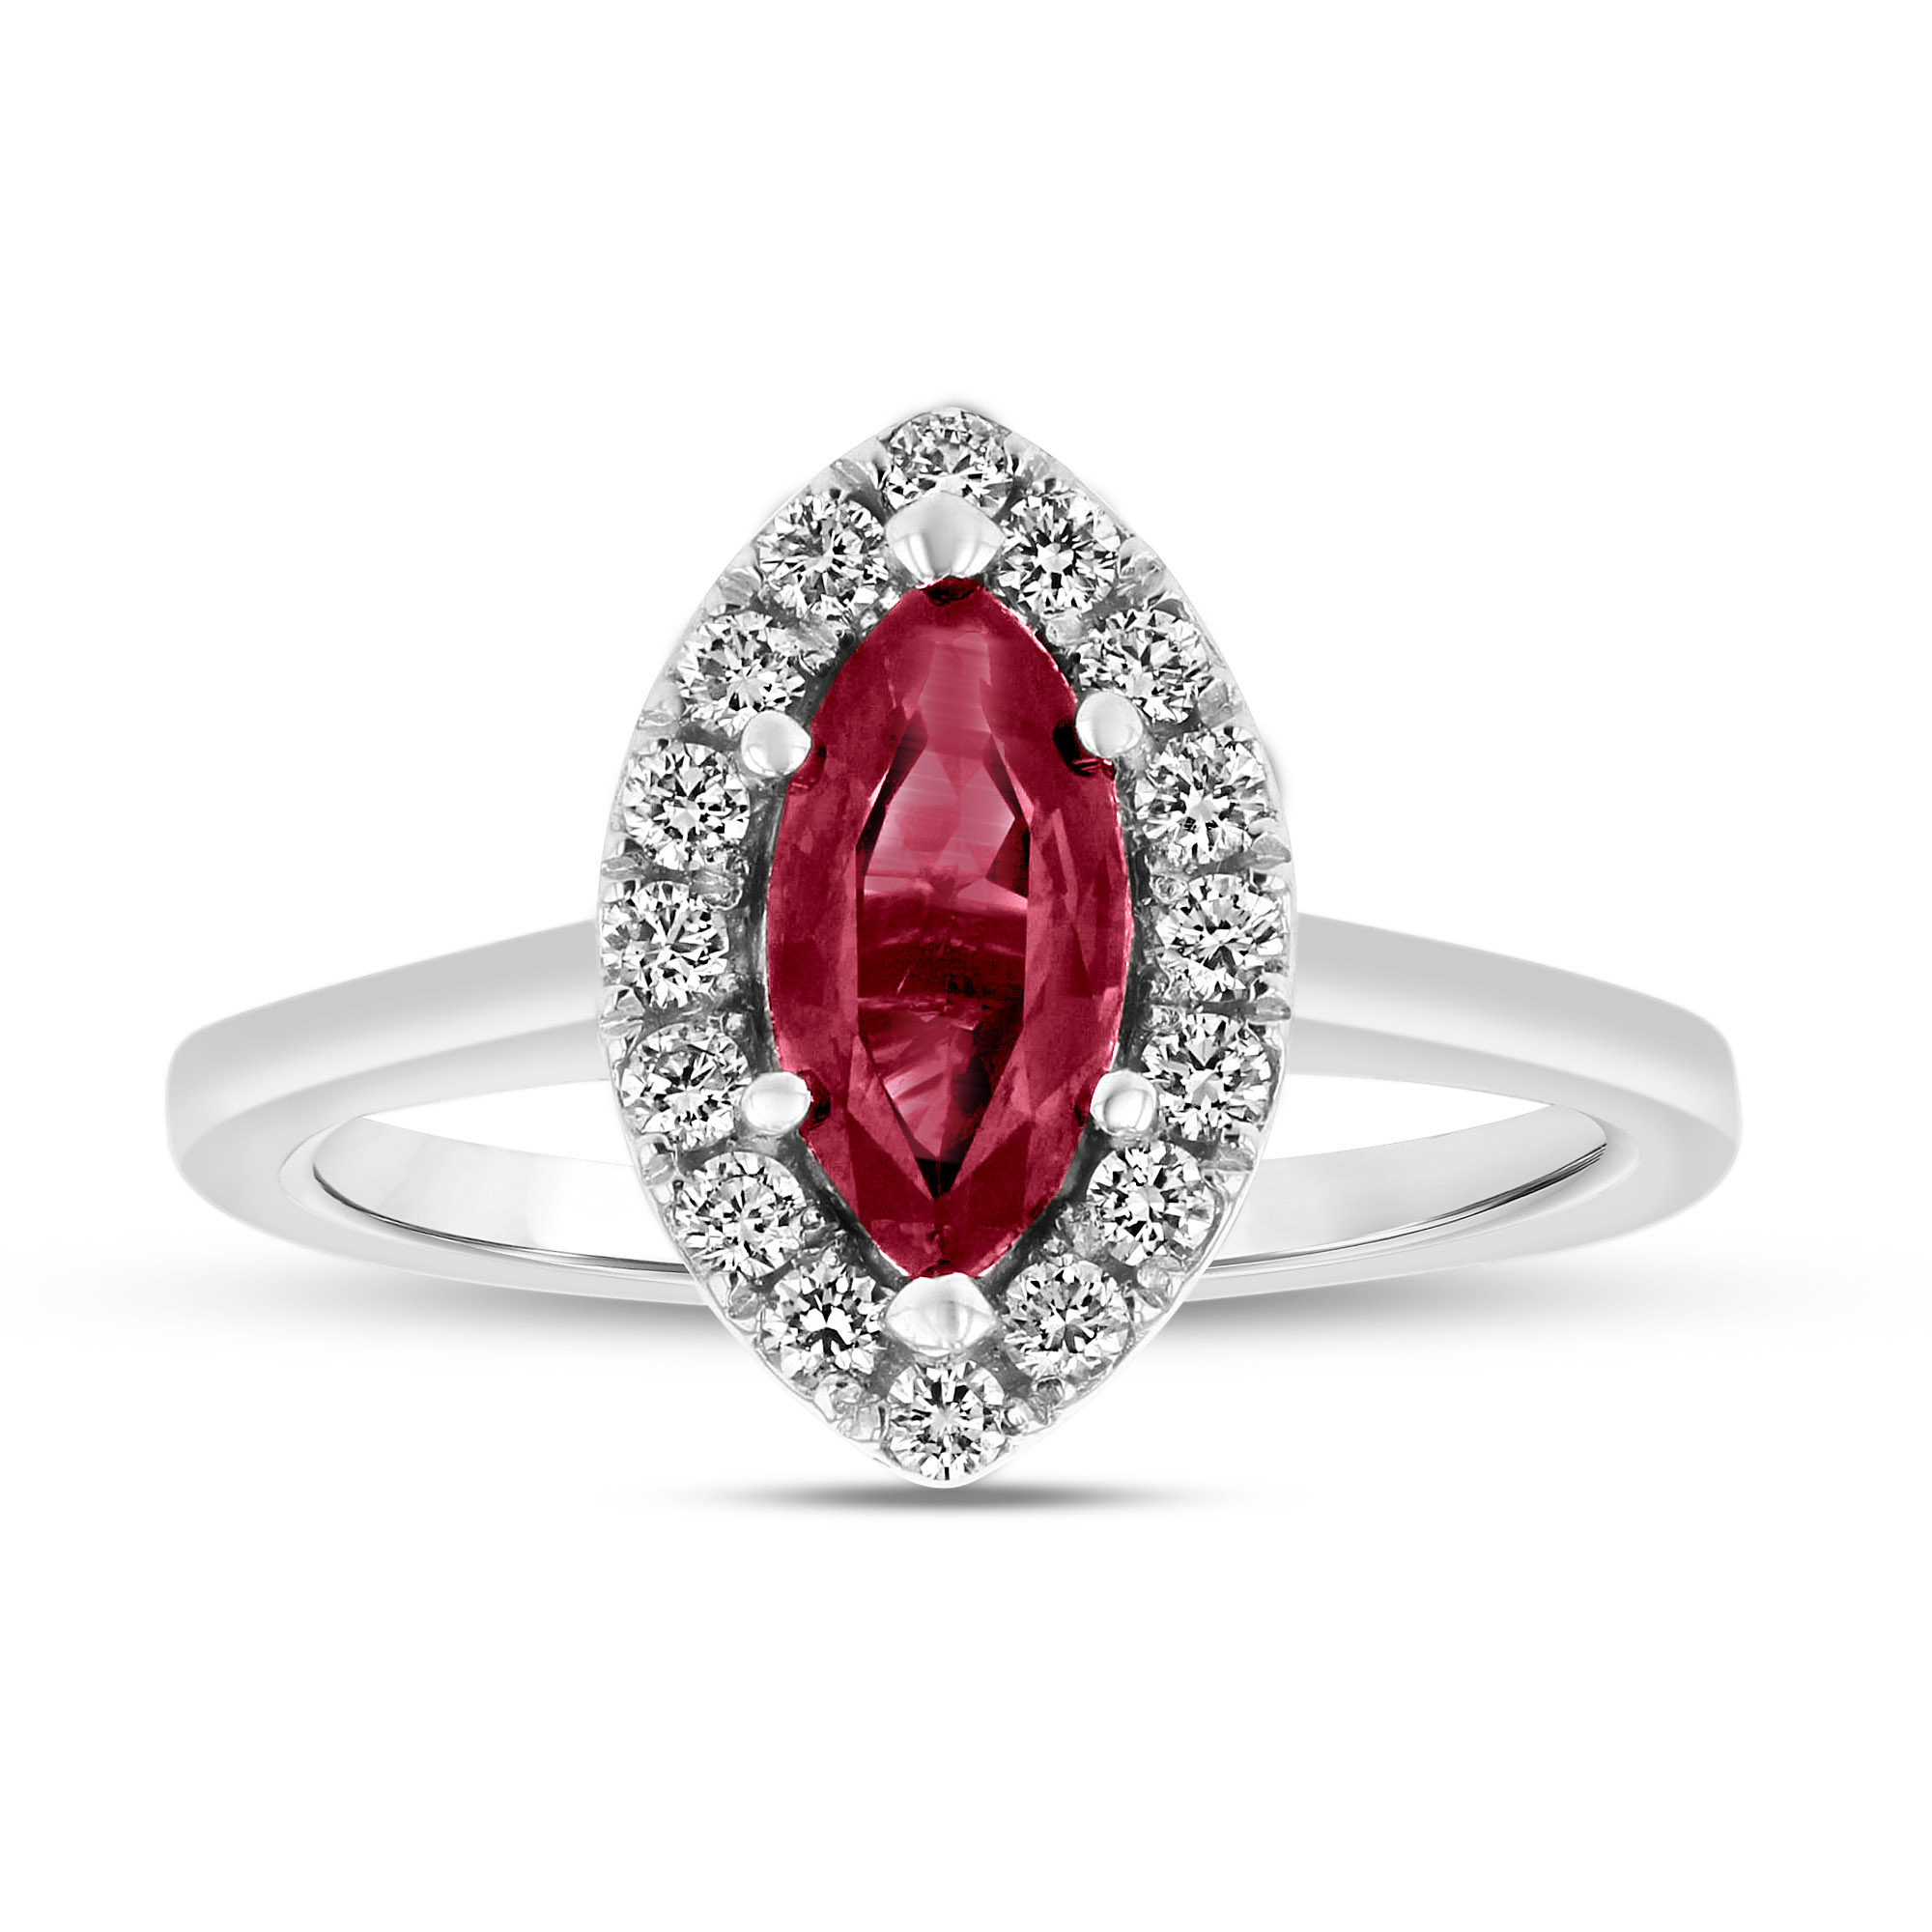 View 1.37ctw Diamond and Ruby Ring in 14k White Gold